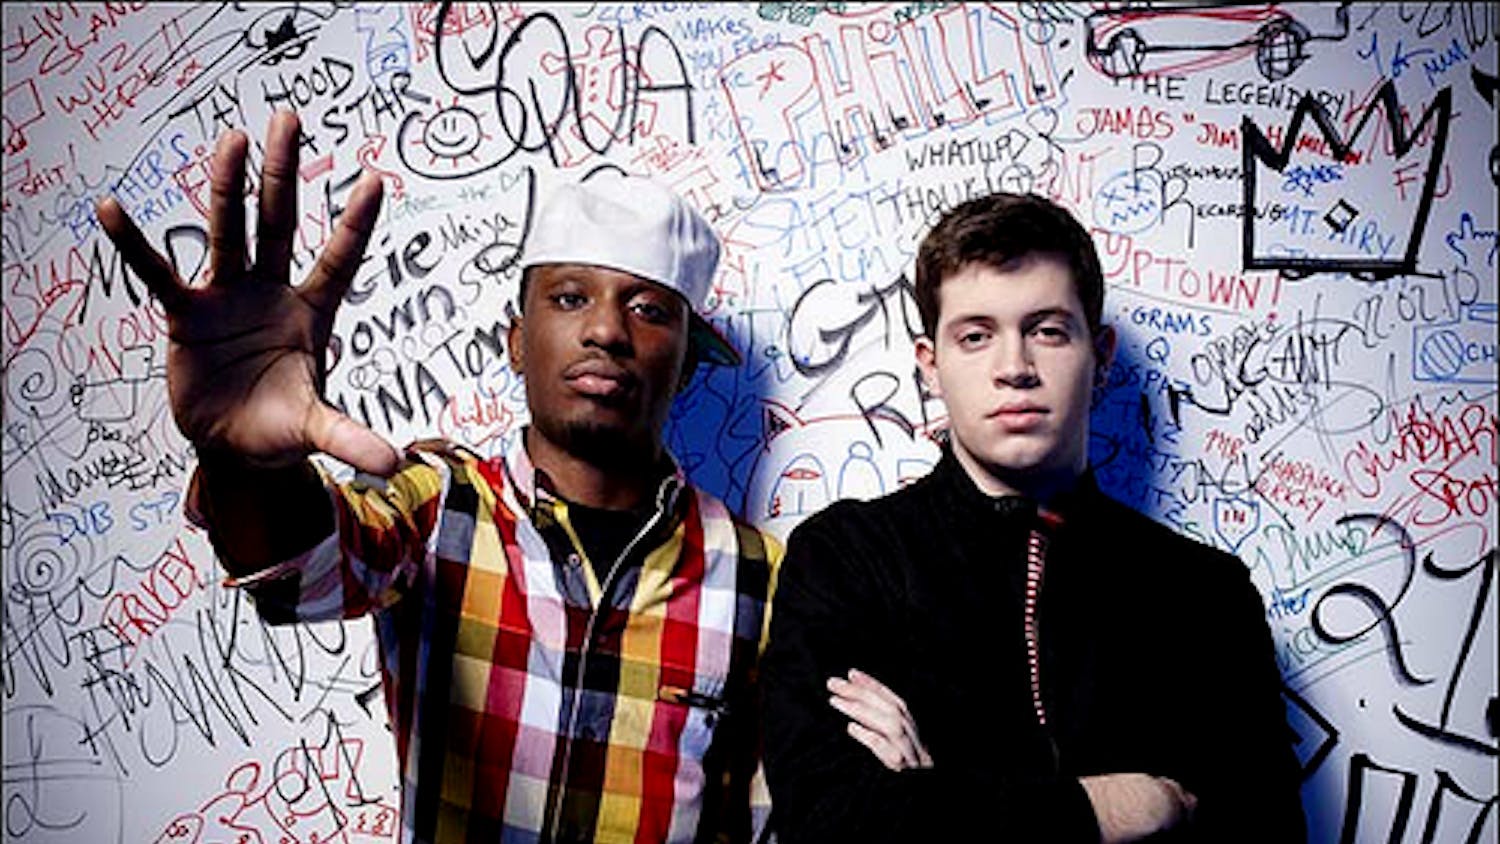 American rap group Chiddy Bang, who set the record for longest continuous rap at the MTV O Music Awards in 2011, will perform in the Tavern on Nov. 17.